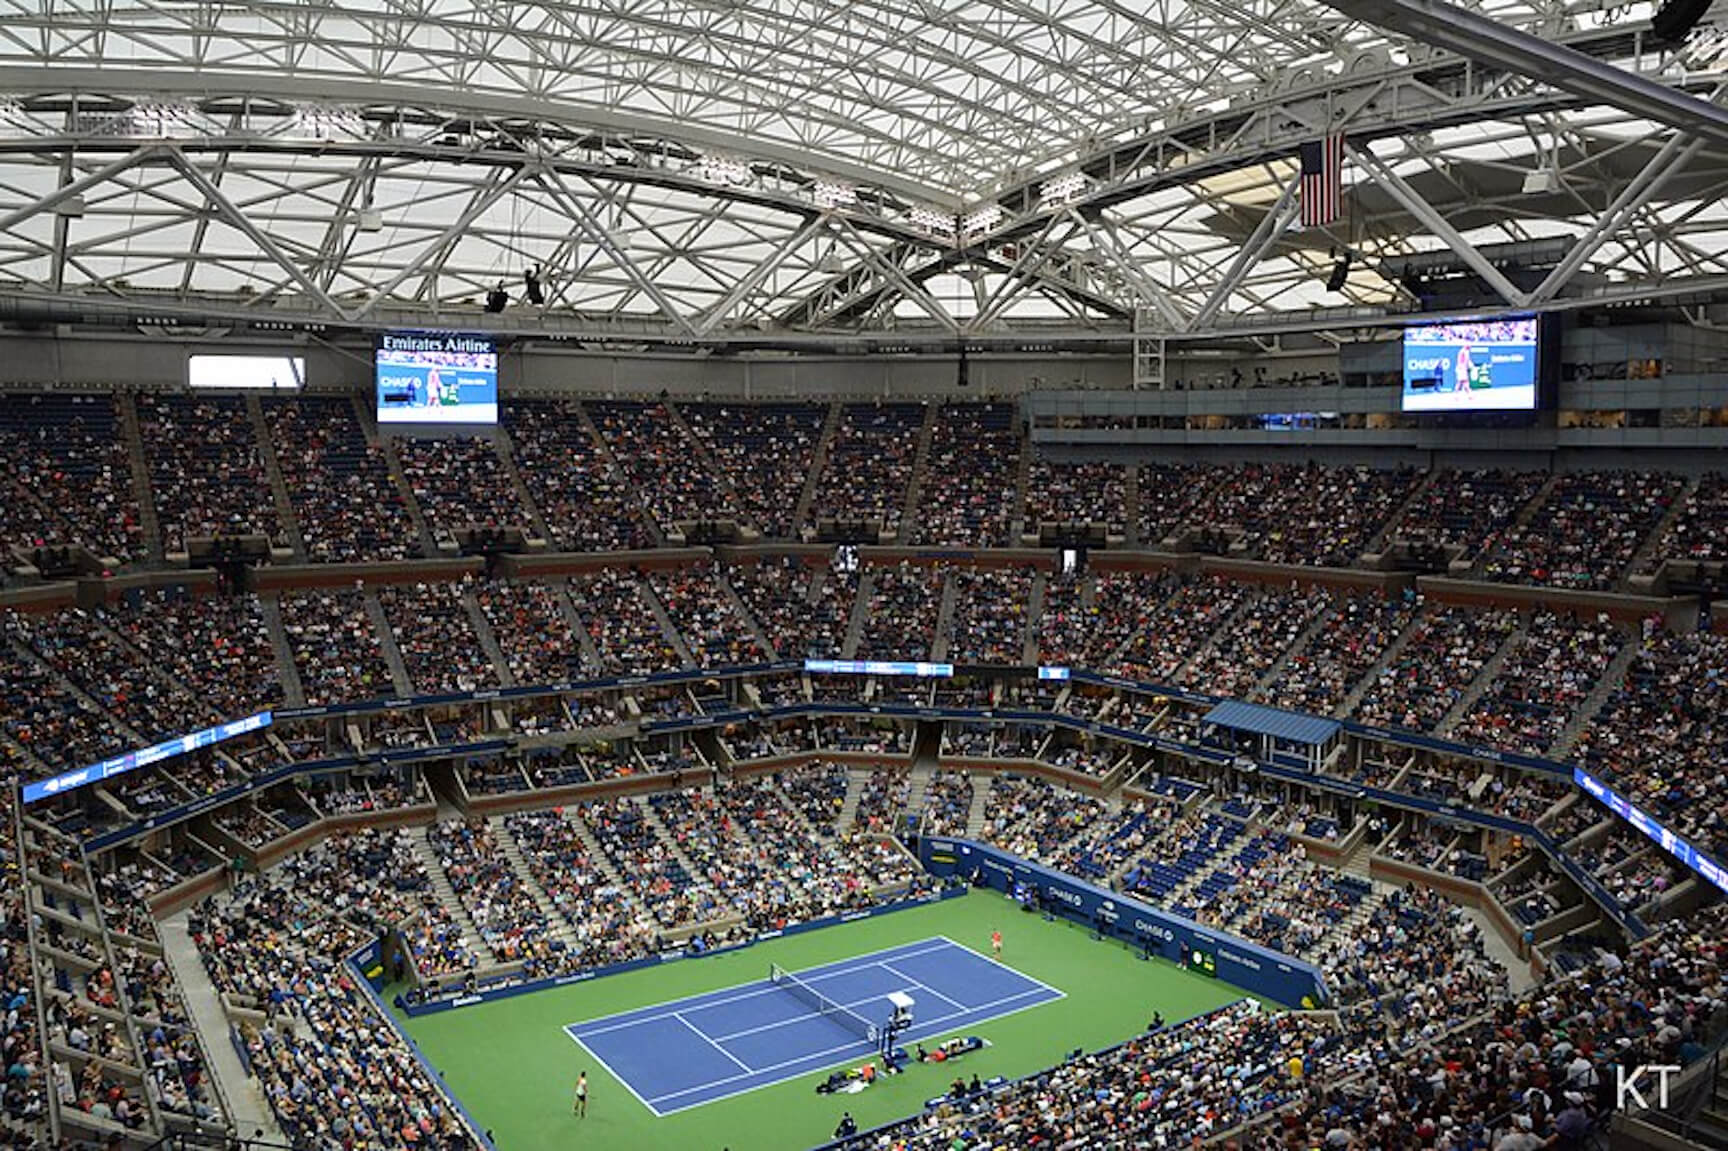 Guide to the 2022 US Open How to get there, what to eat, more amNewYork